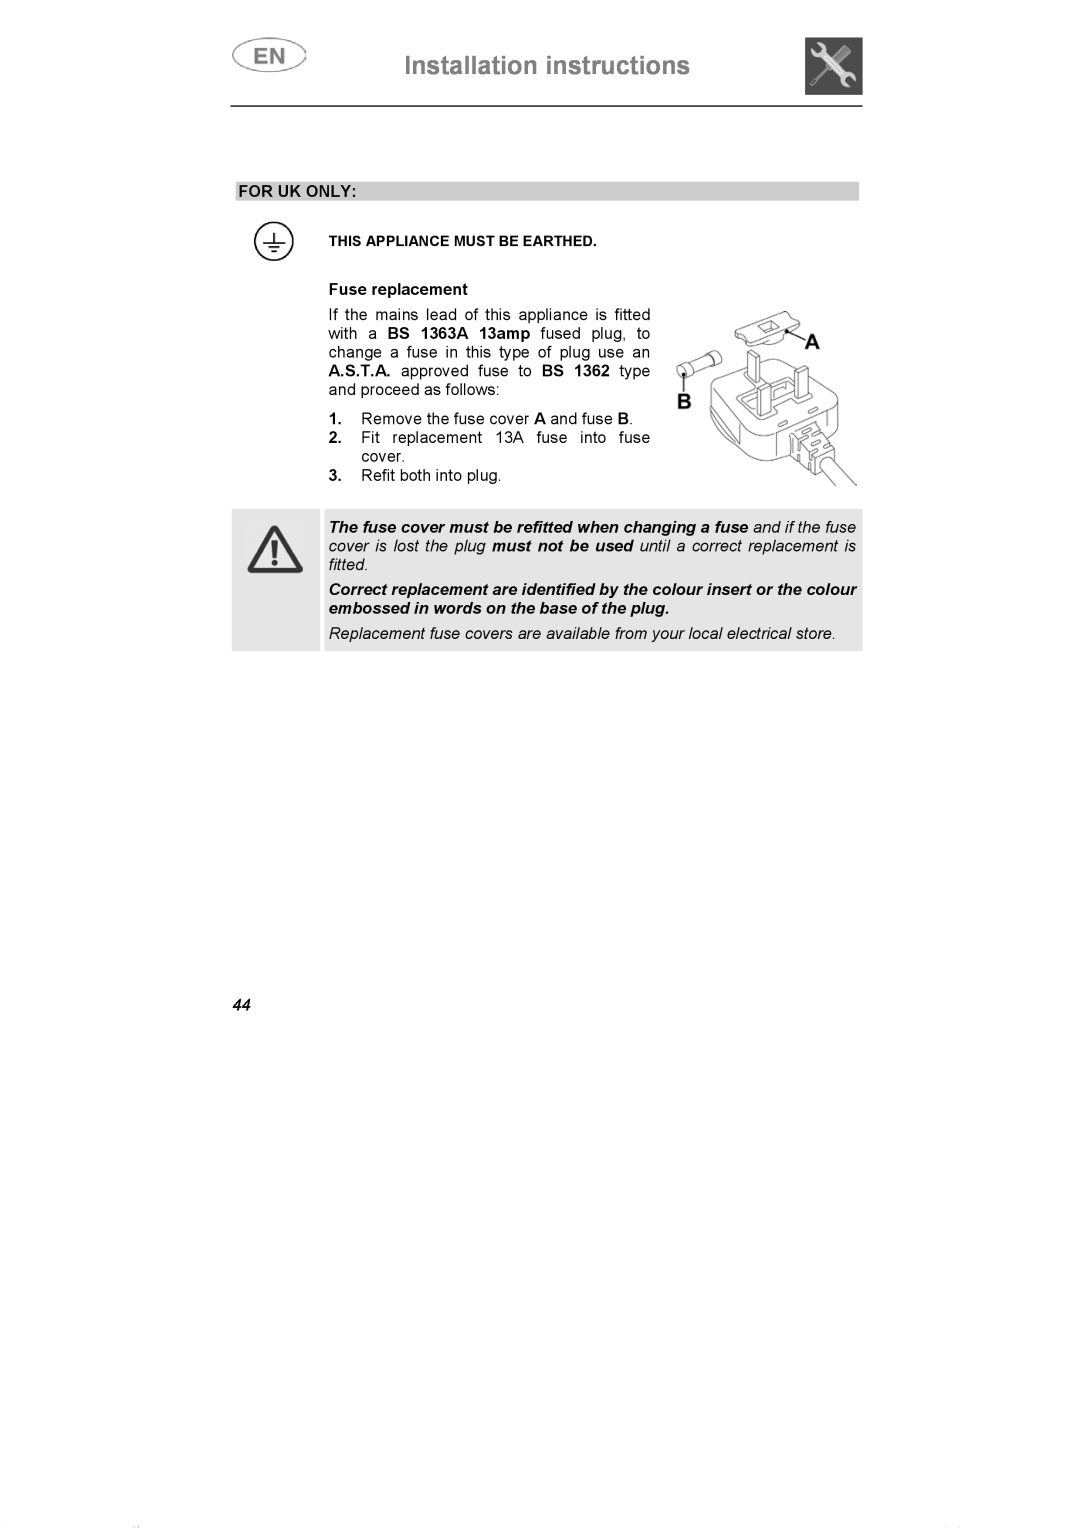 Smeg DI607 manual For Uk Only, Fuse replacement, Installation instructions 